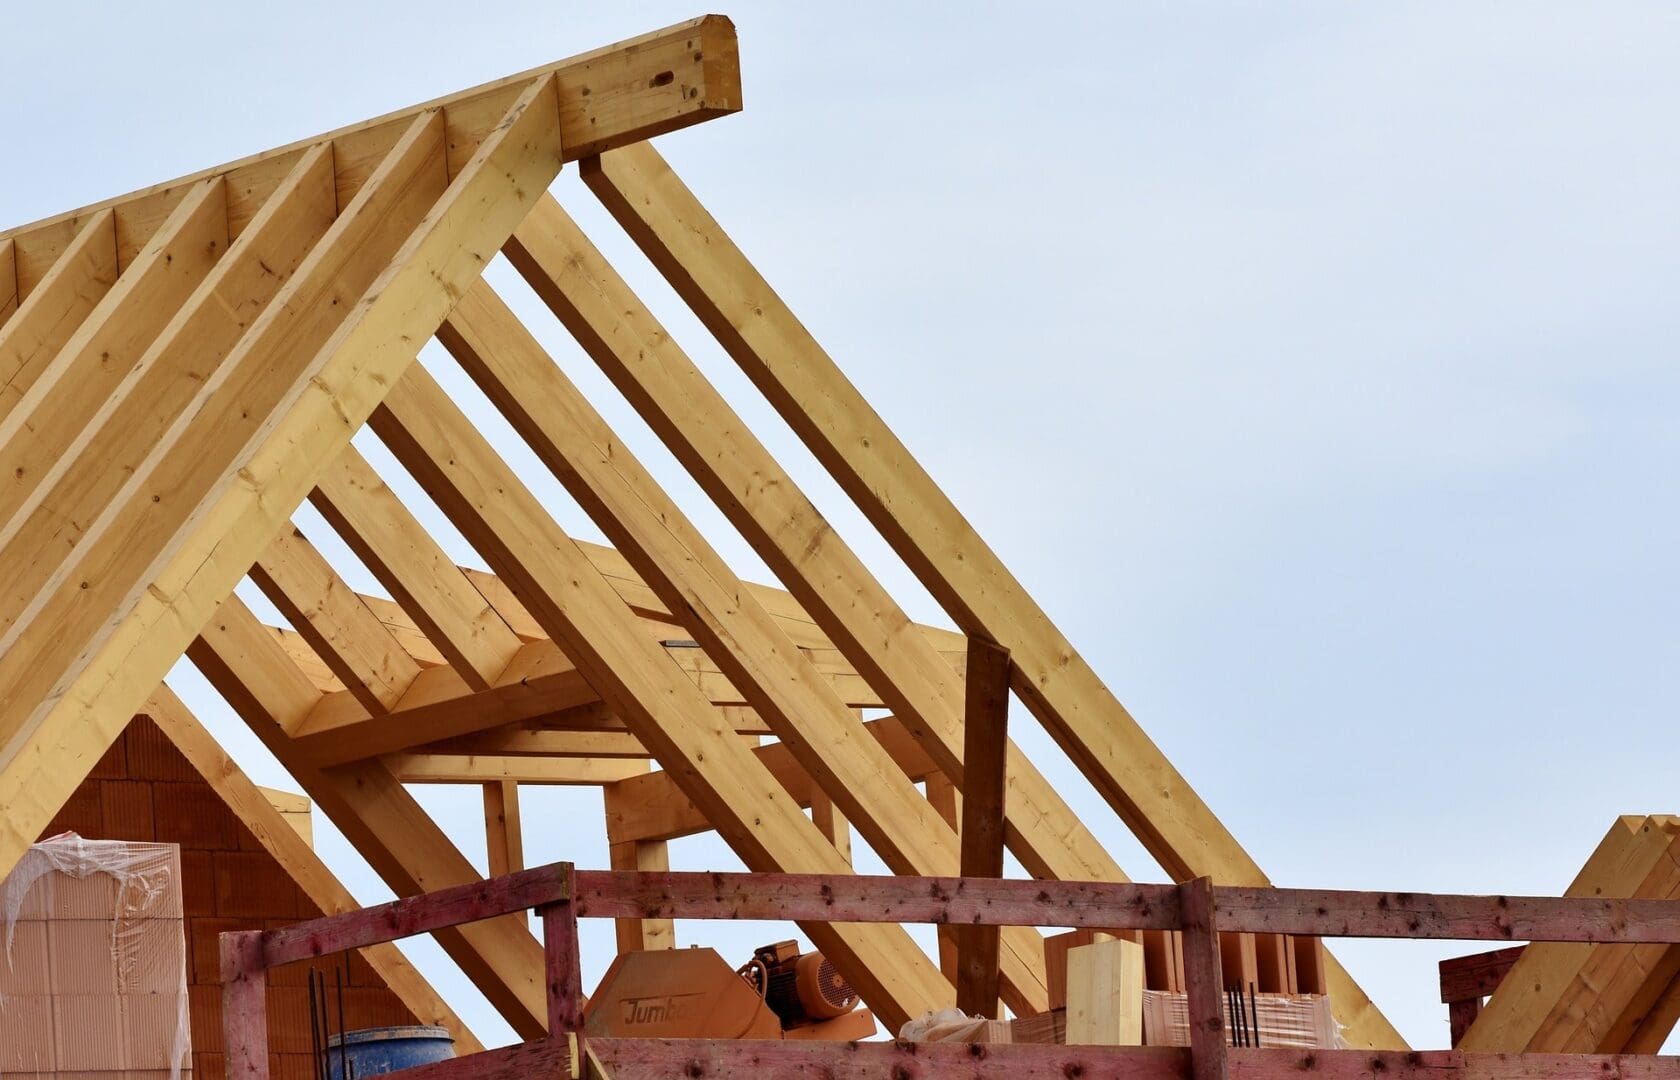 A wooden roof structure being built on top of a building.